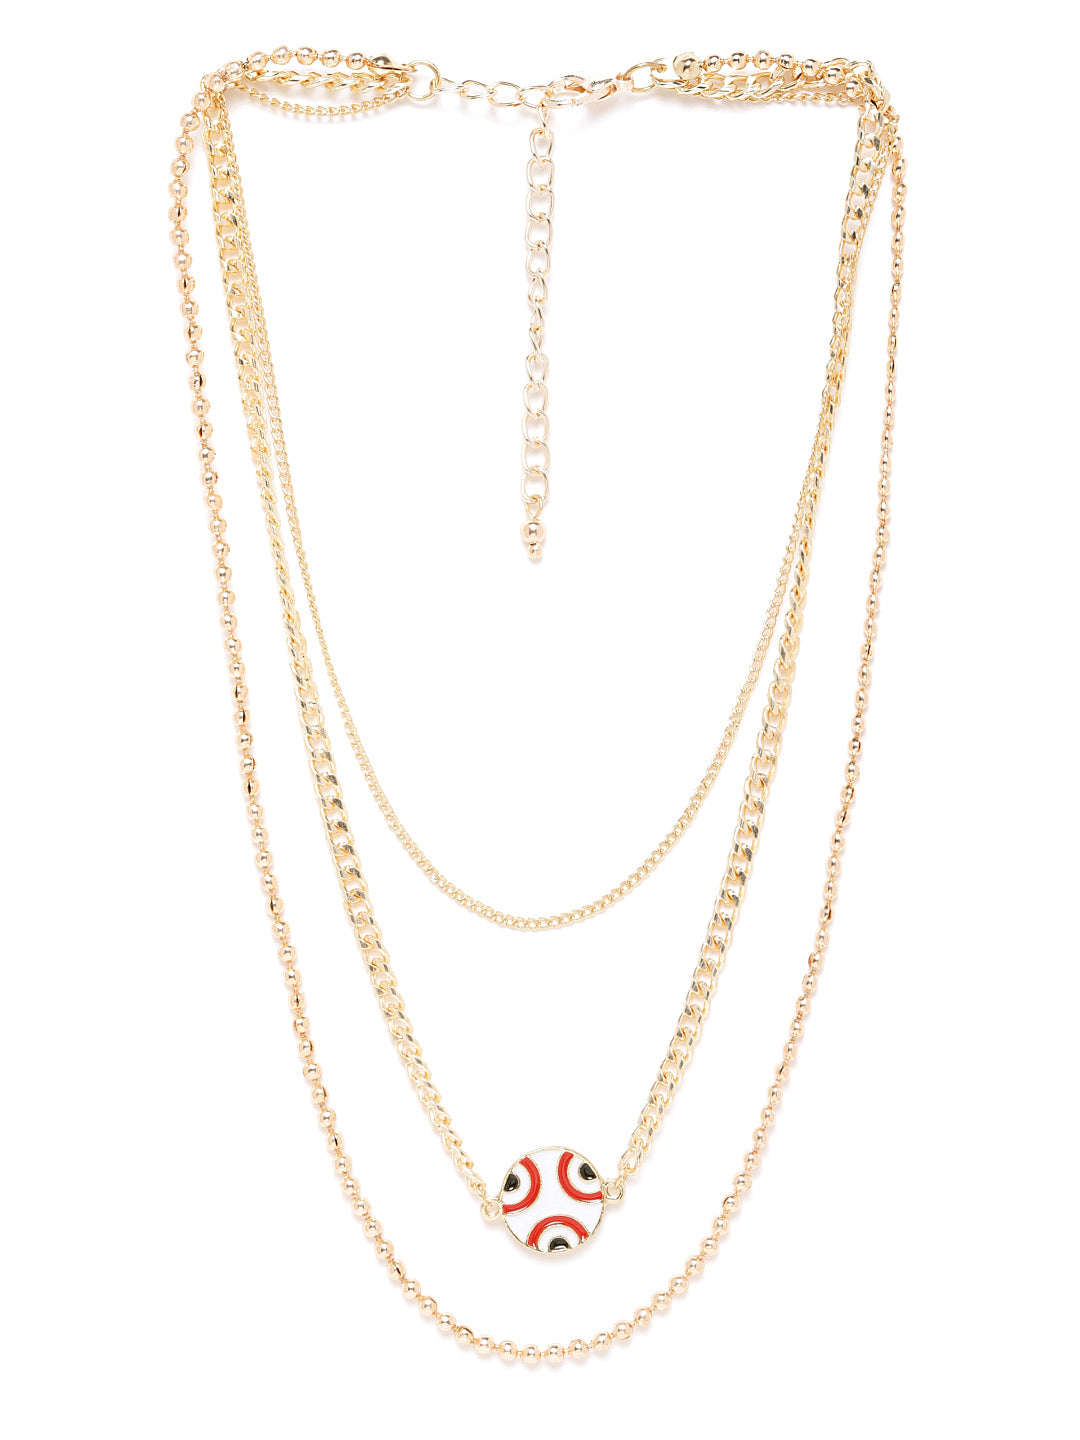 Blueberry gold Plated Evil Eye detailing chain layered necklace